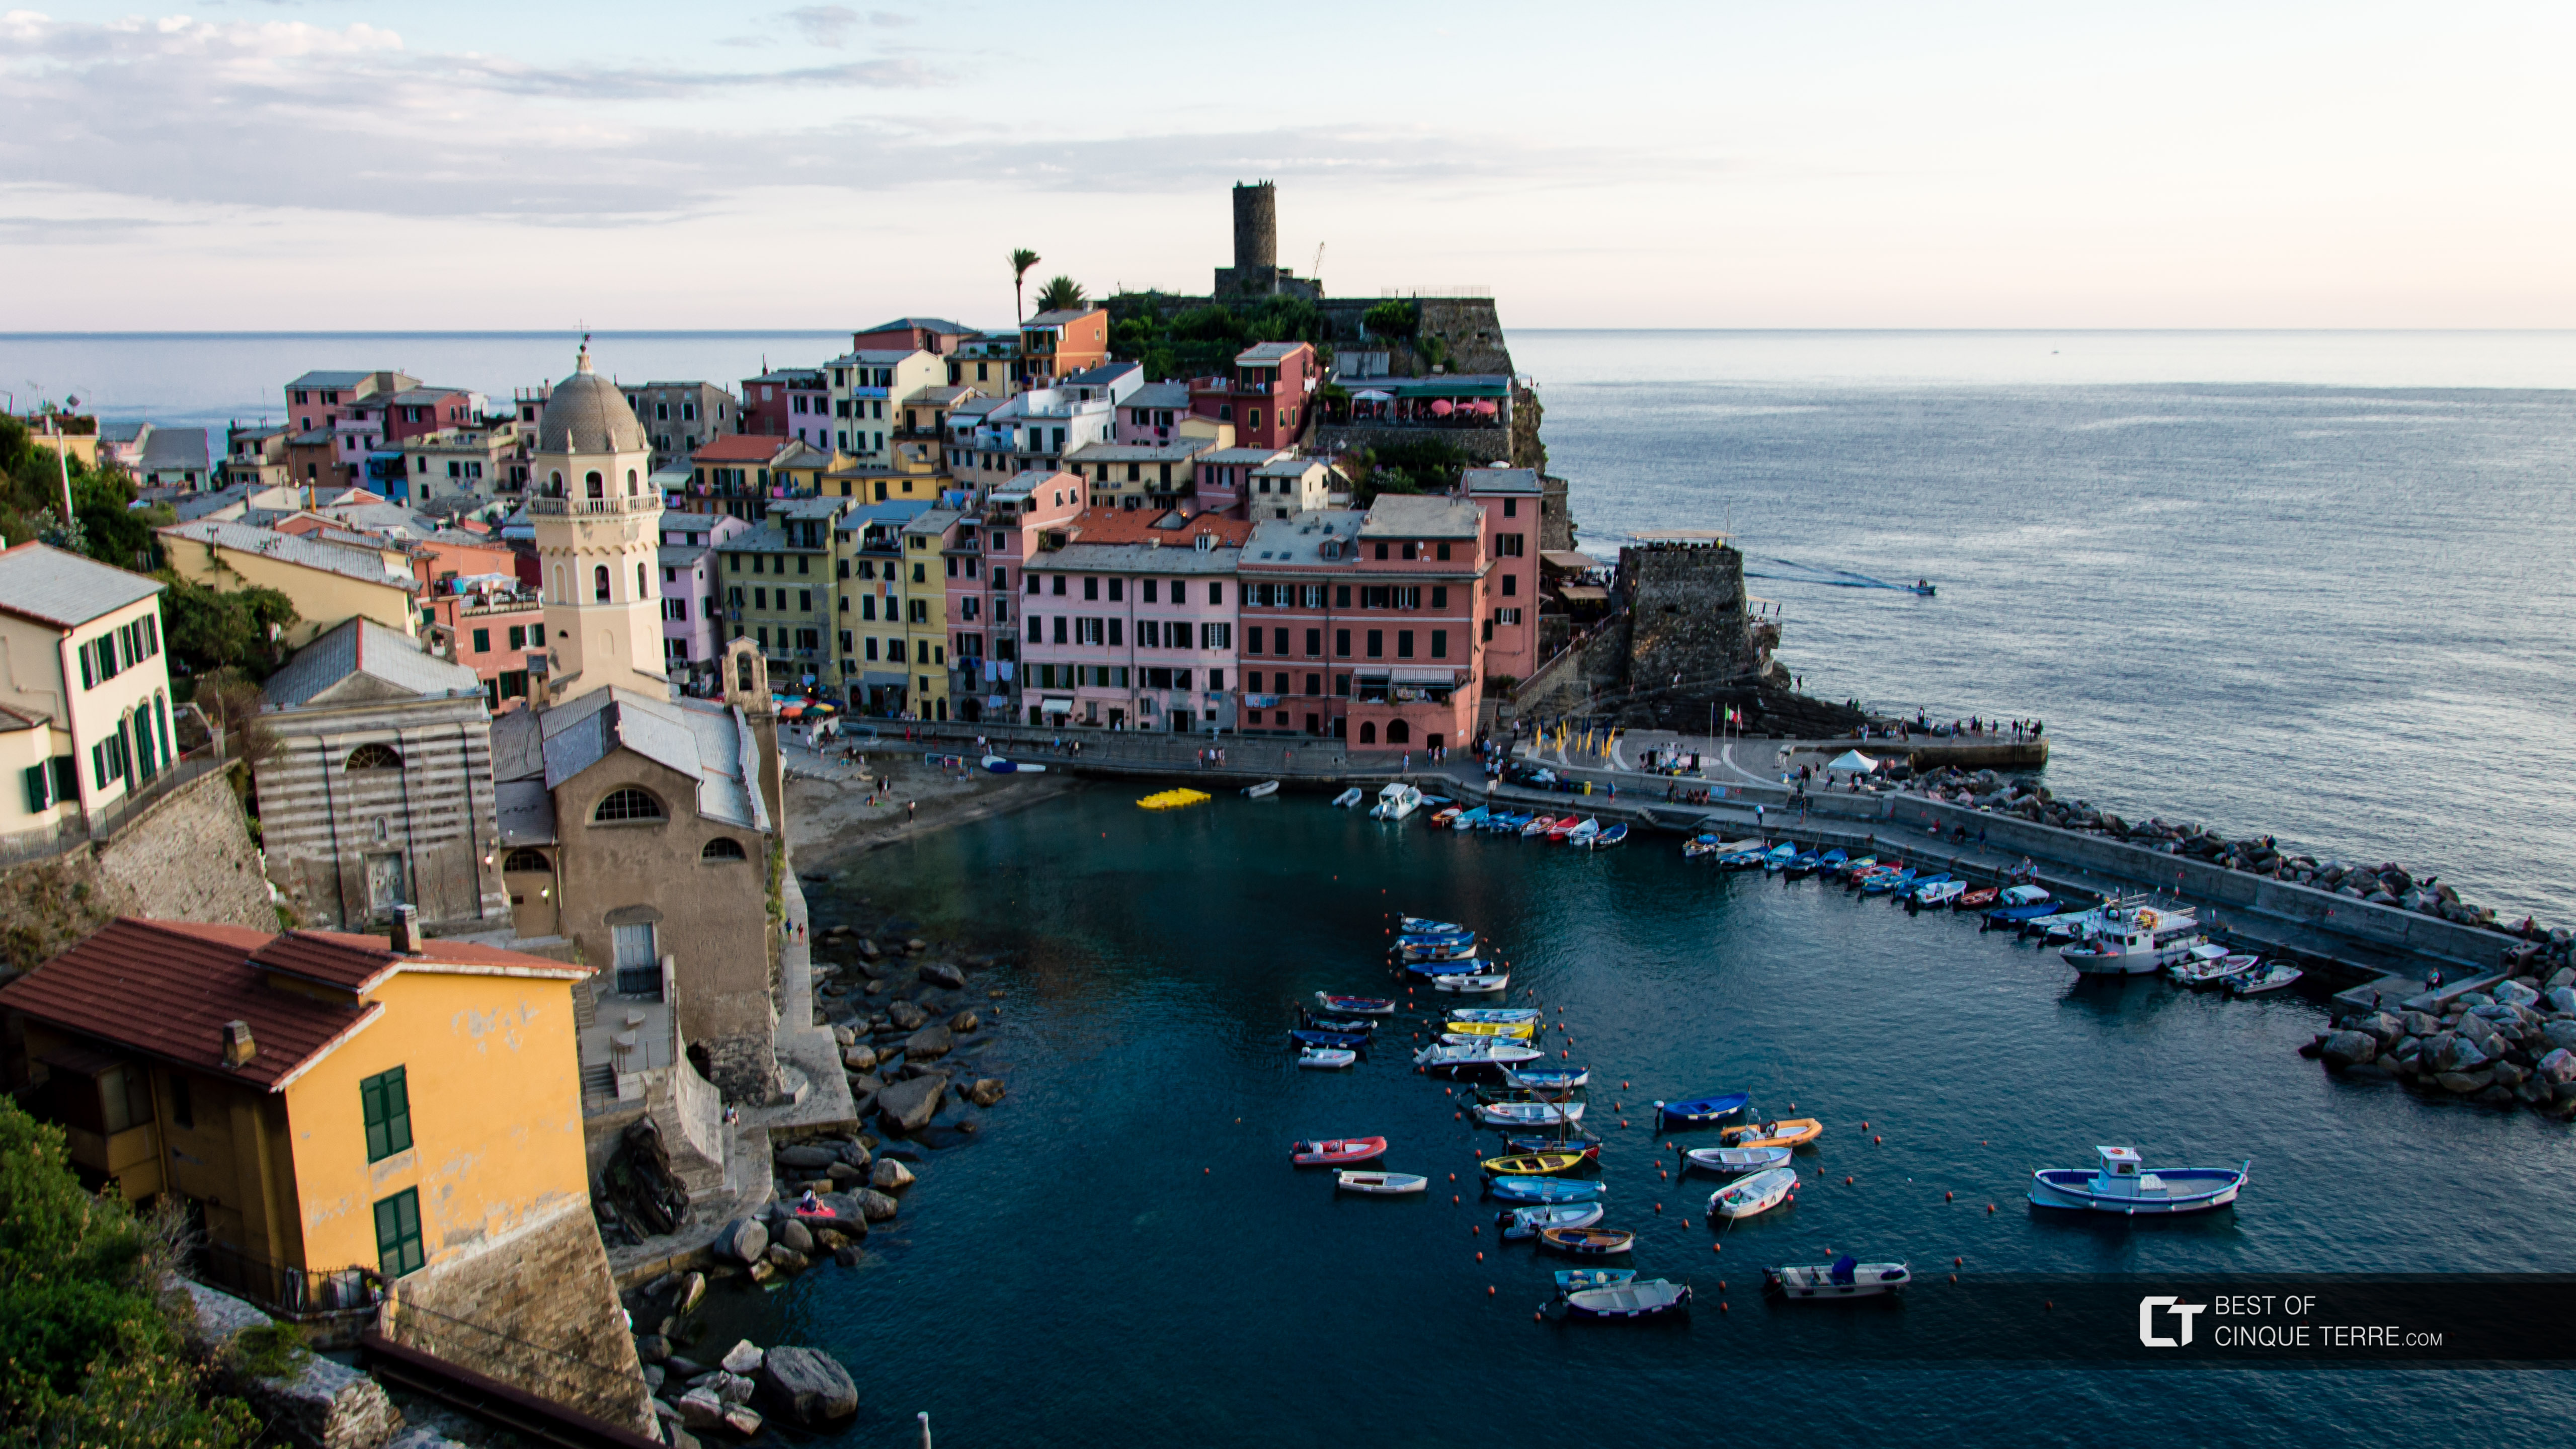 View of the bay, Vernazza, Cinque Terre, Italy